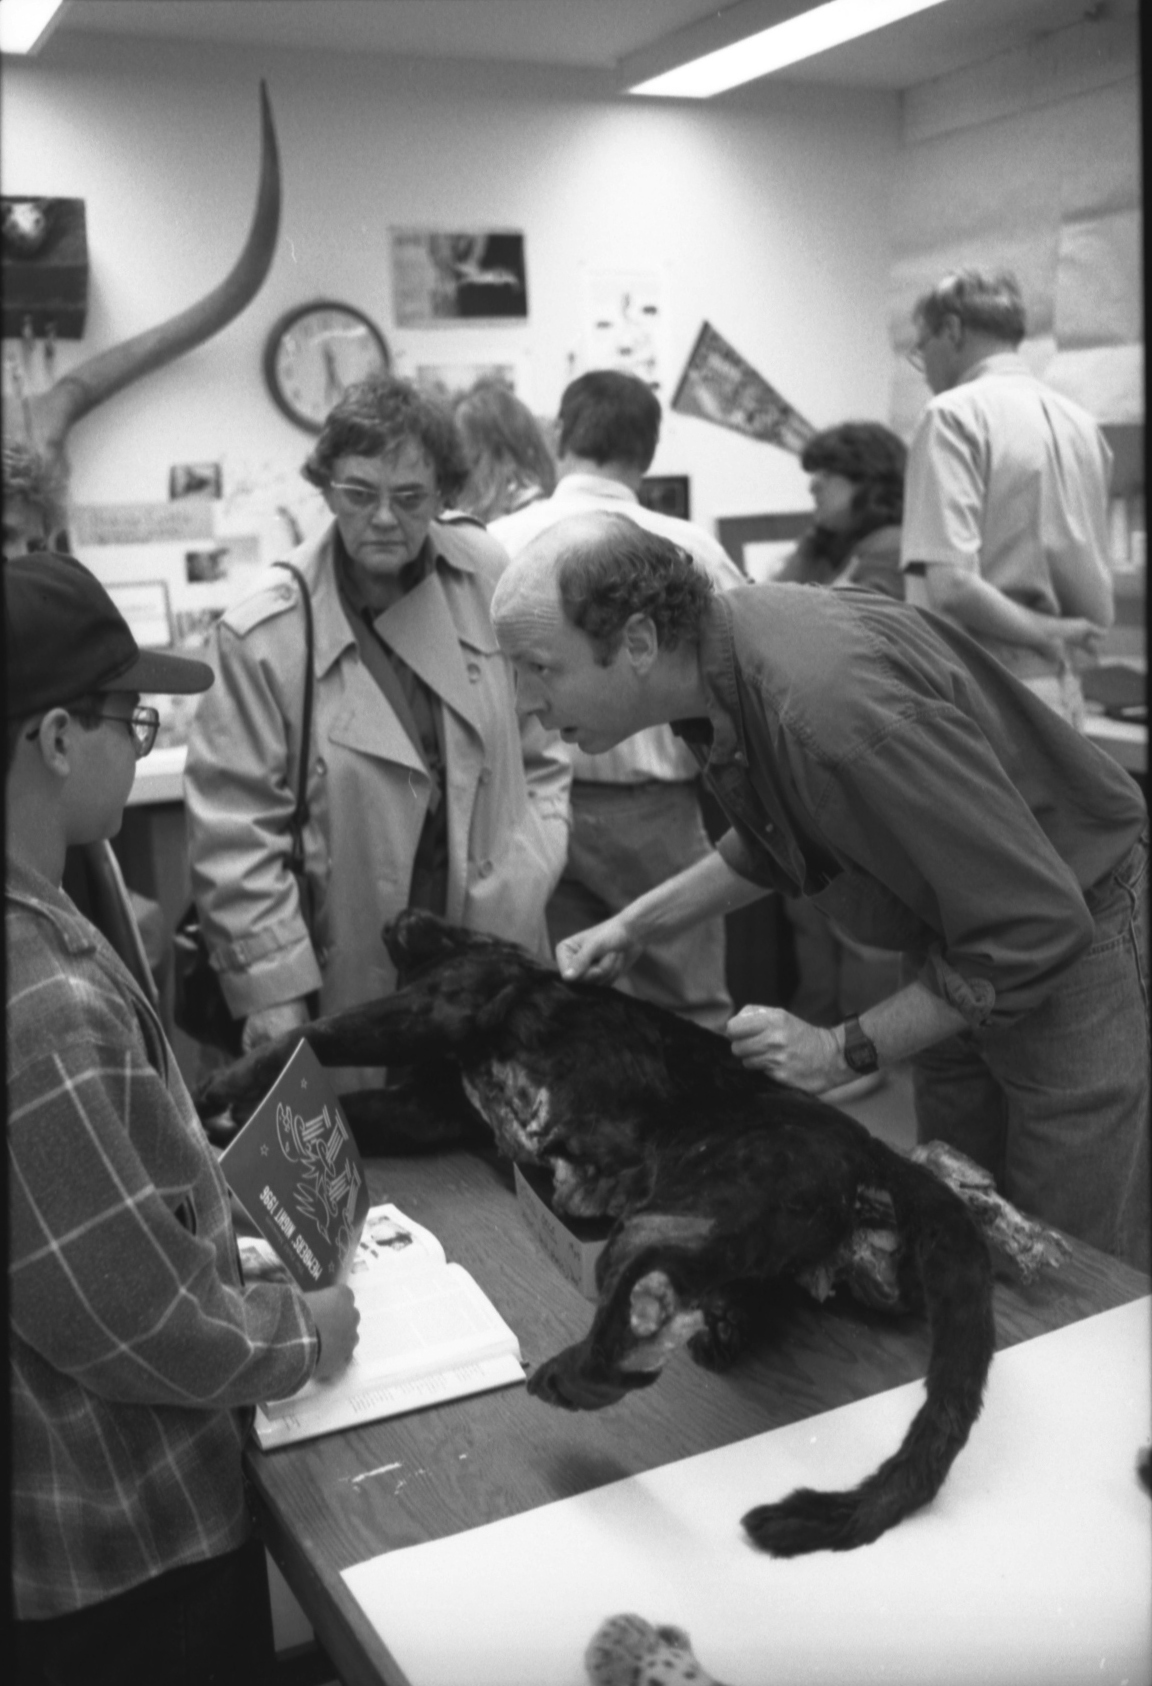 Members’ Night 1996, in the Mammals/Birds prep lab on the 3rd floor. Field Museum photo by Robert Weiglein. GN87839_33.